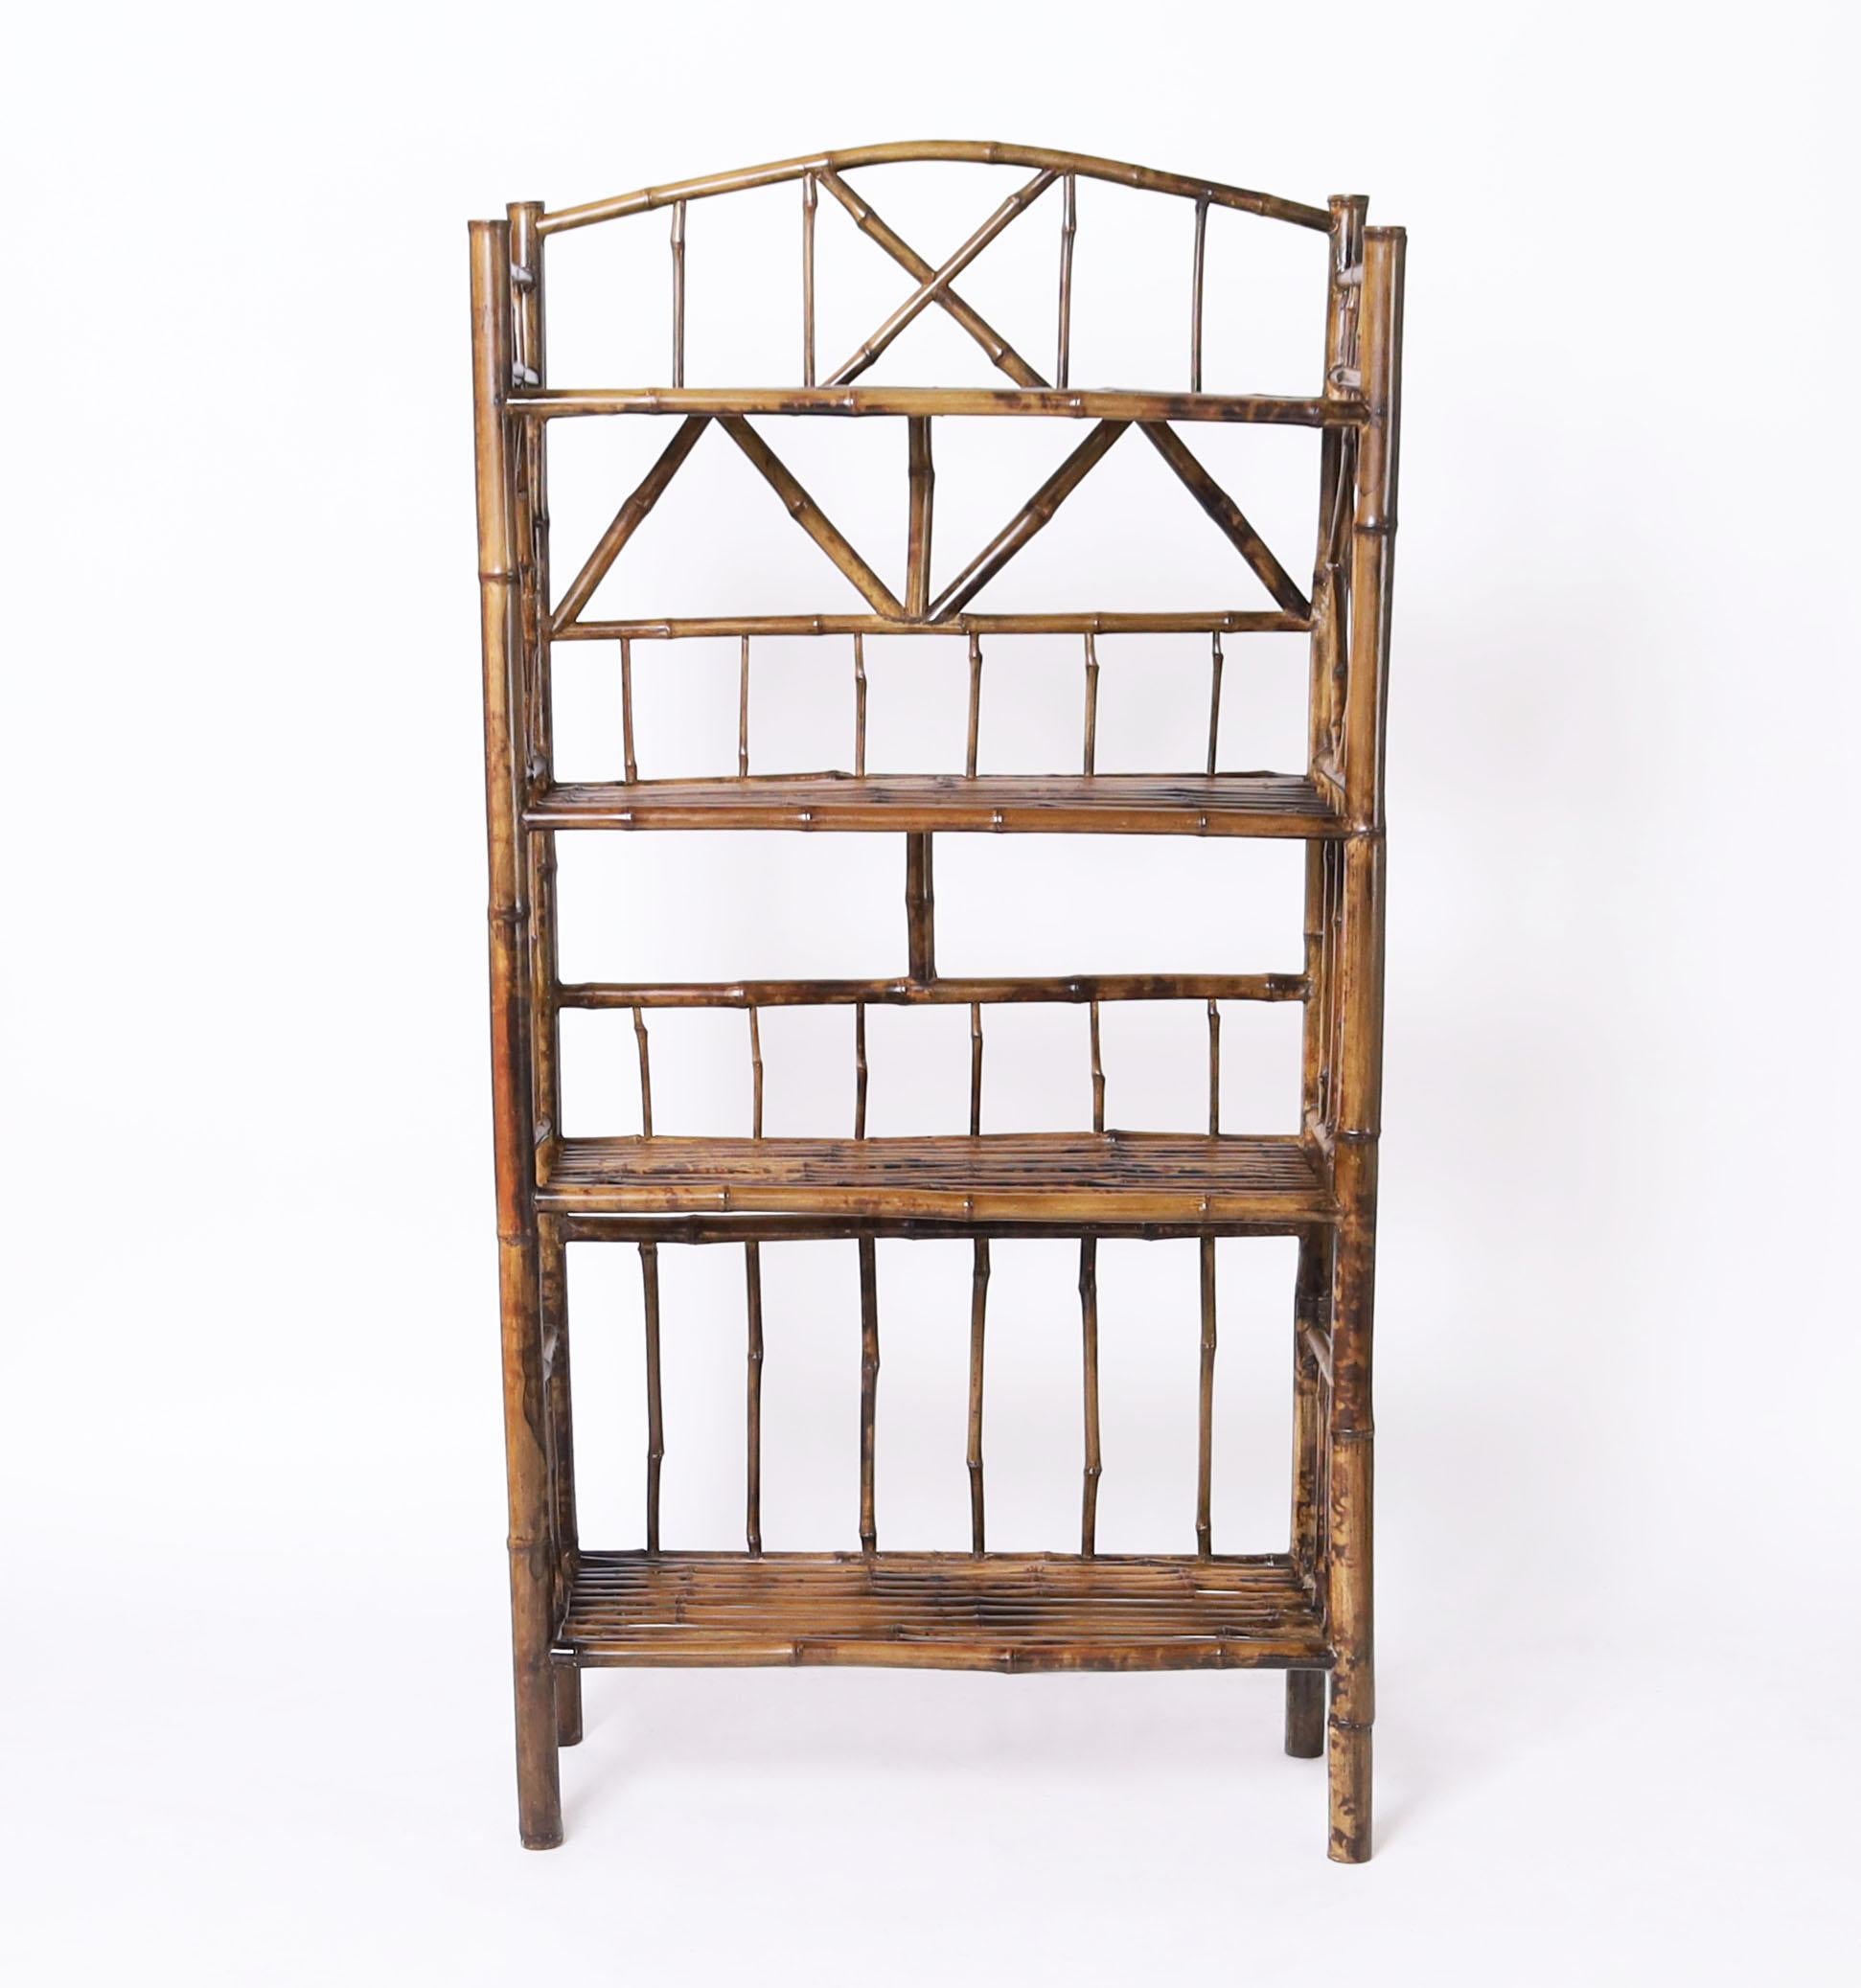 Standout 19th century English etagere crafted in bamboo with four shelves in a Chinese chippendale form. 